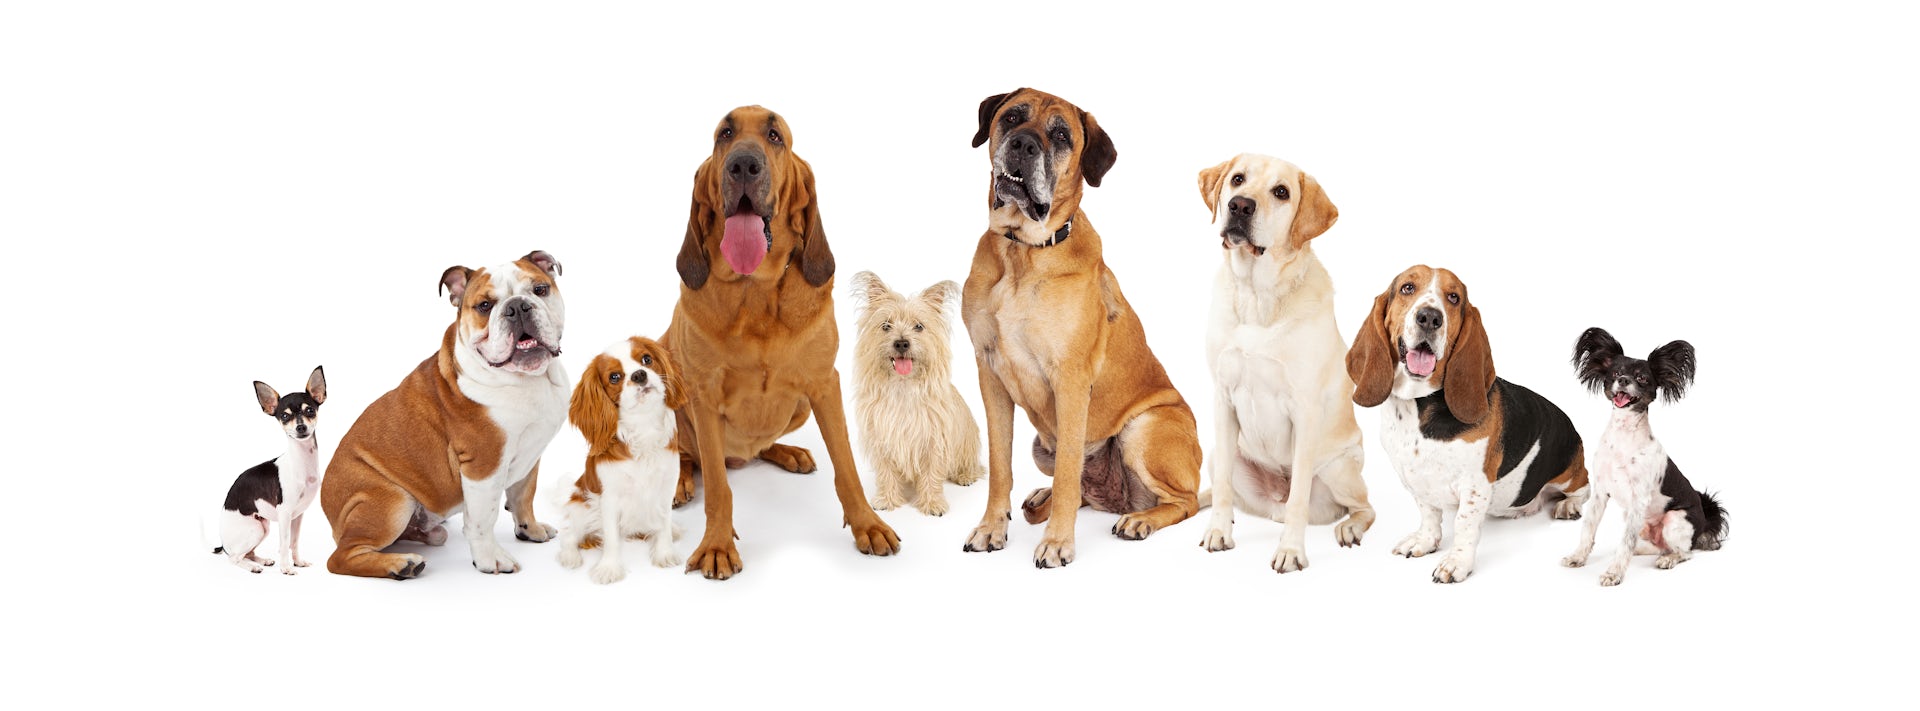 Why dog breeds aren't considered 